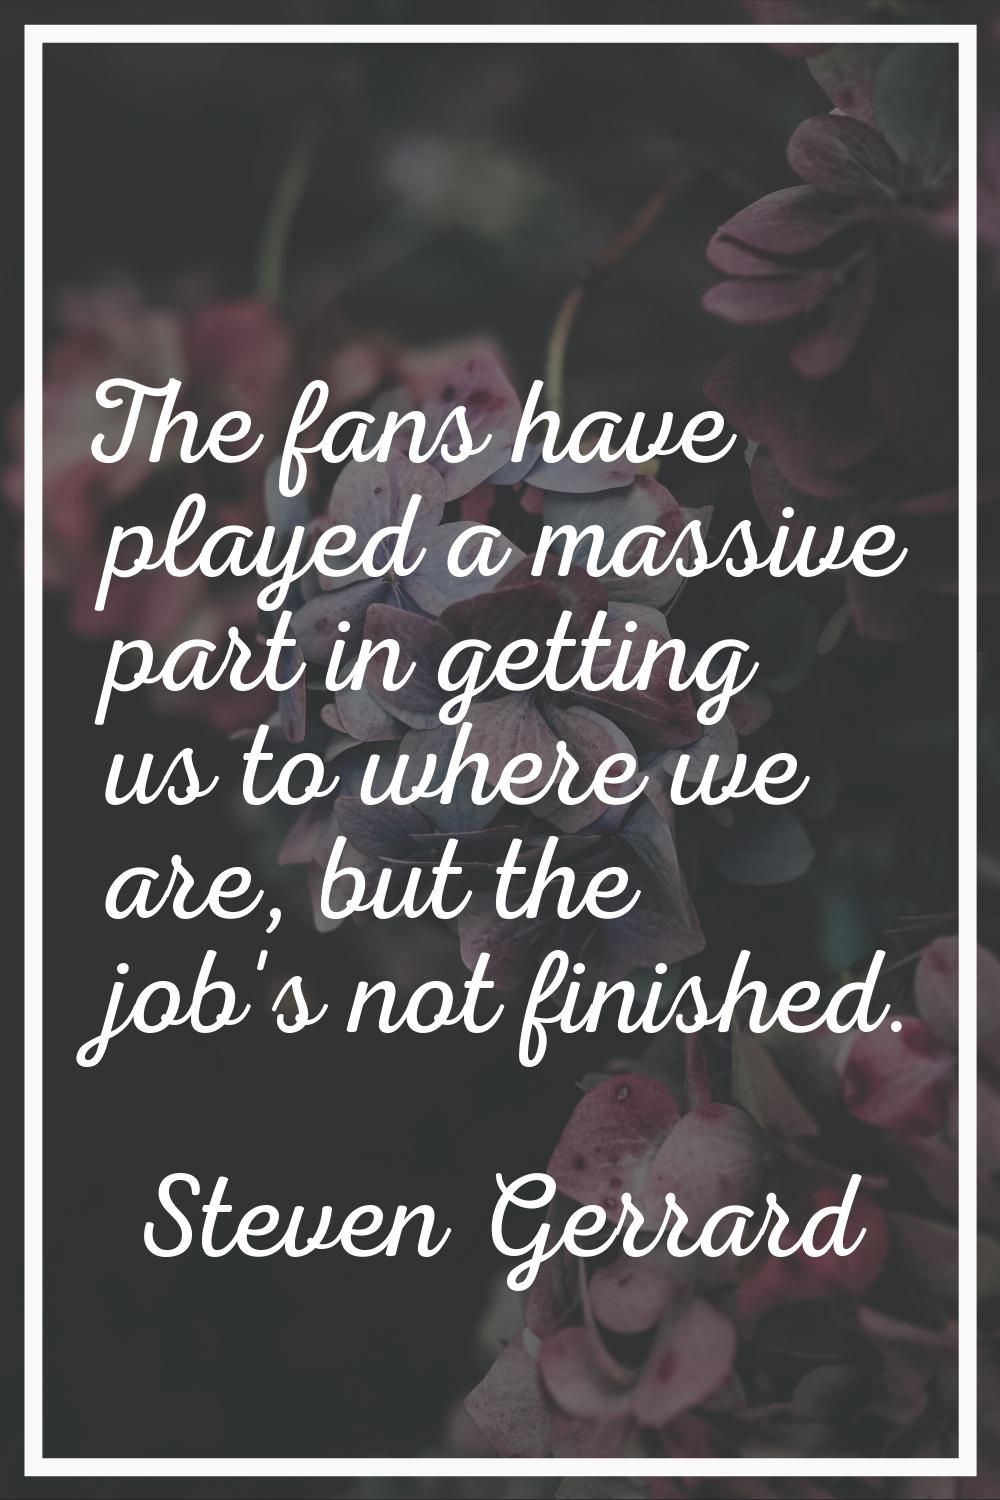 The fans have played a massive part in getting us to where we are, but the job's not finished.